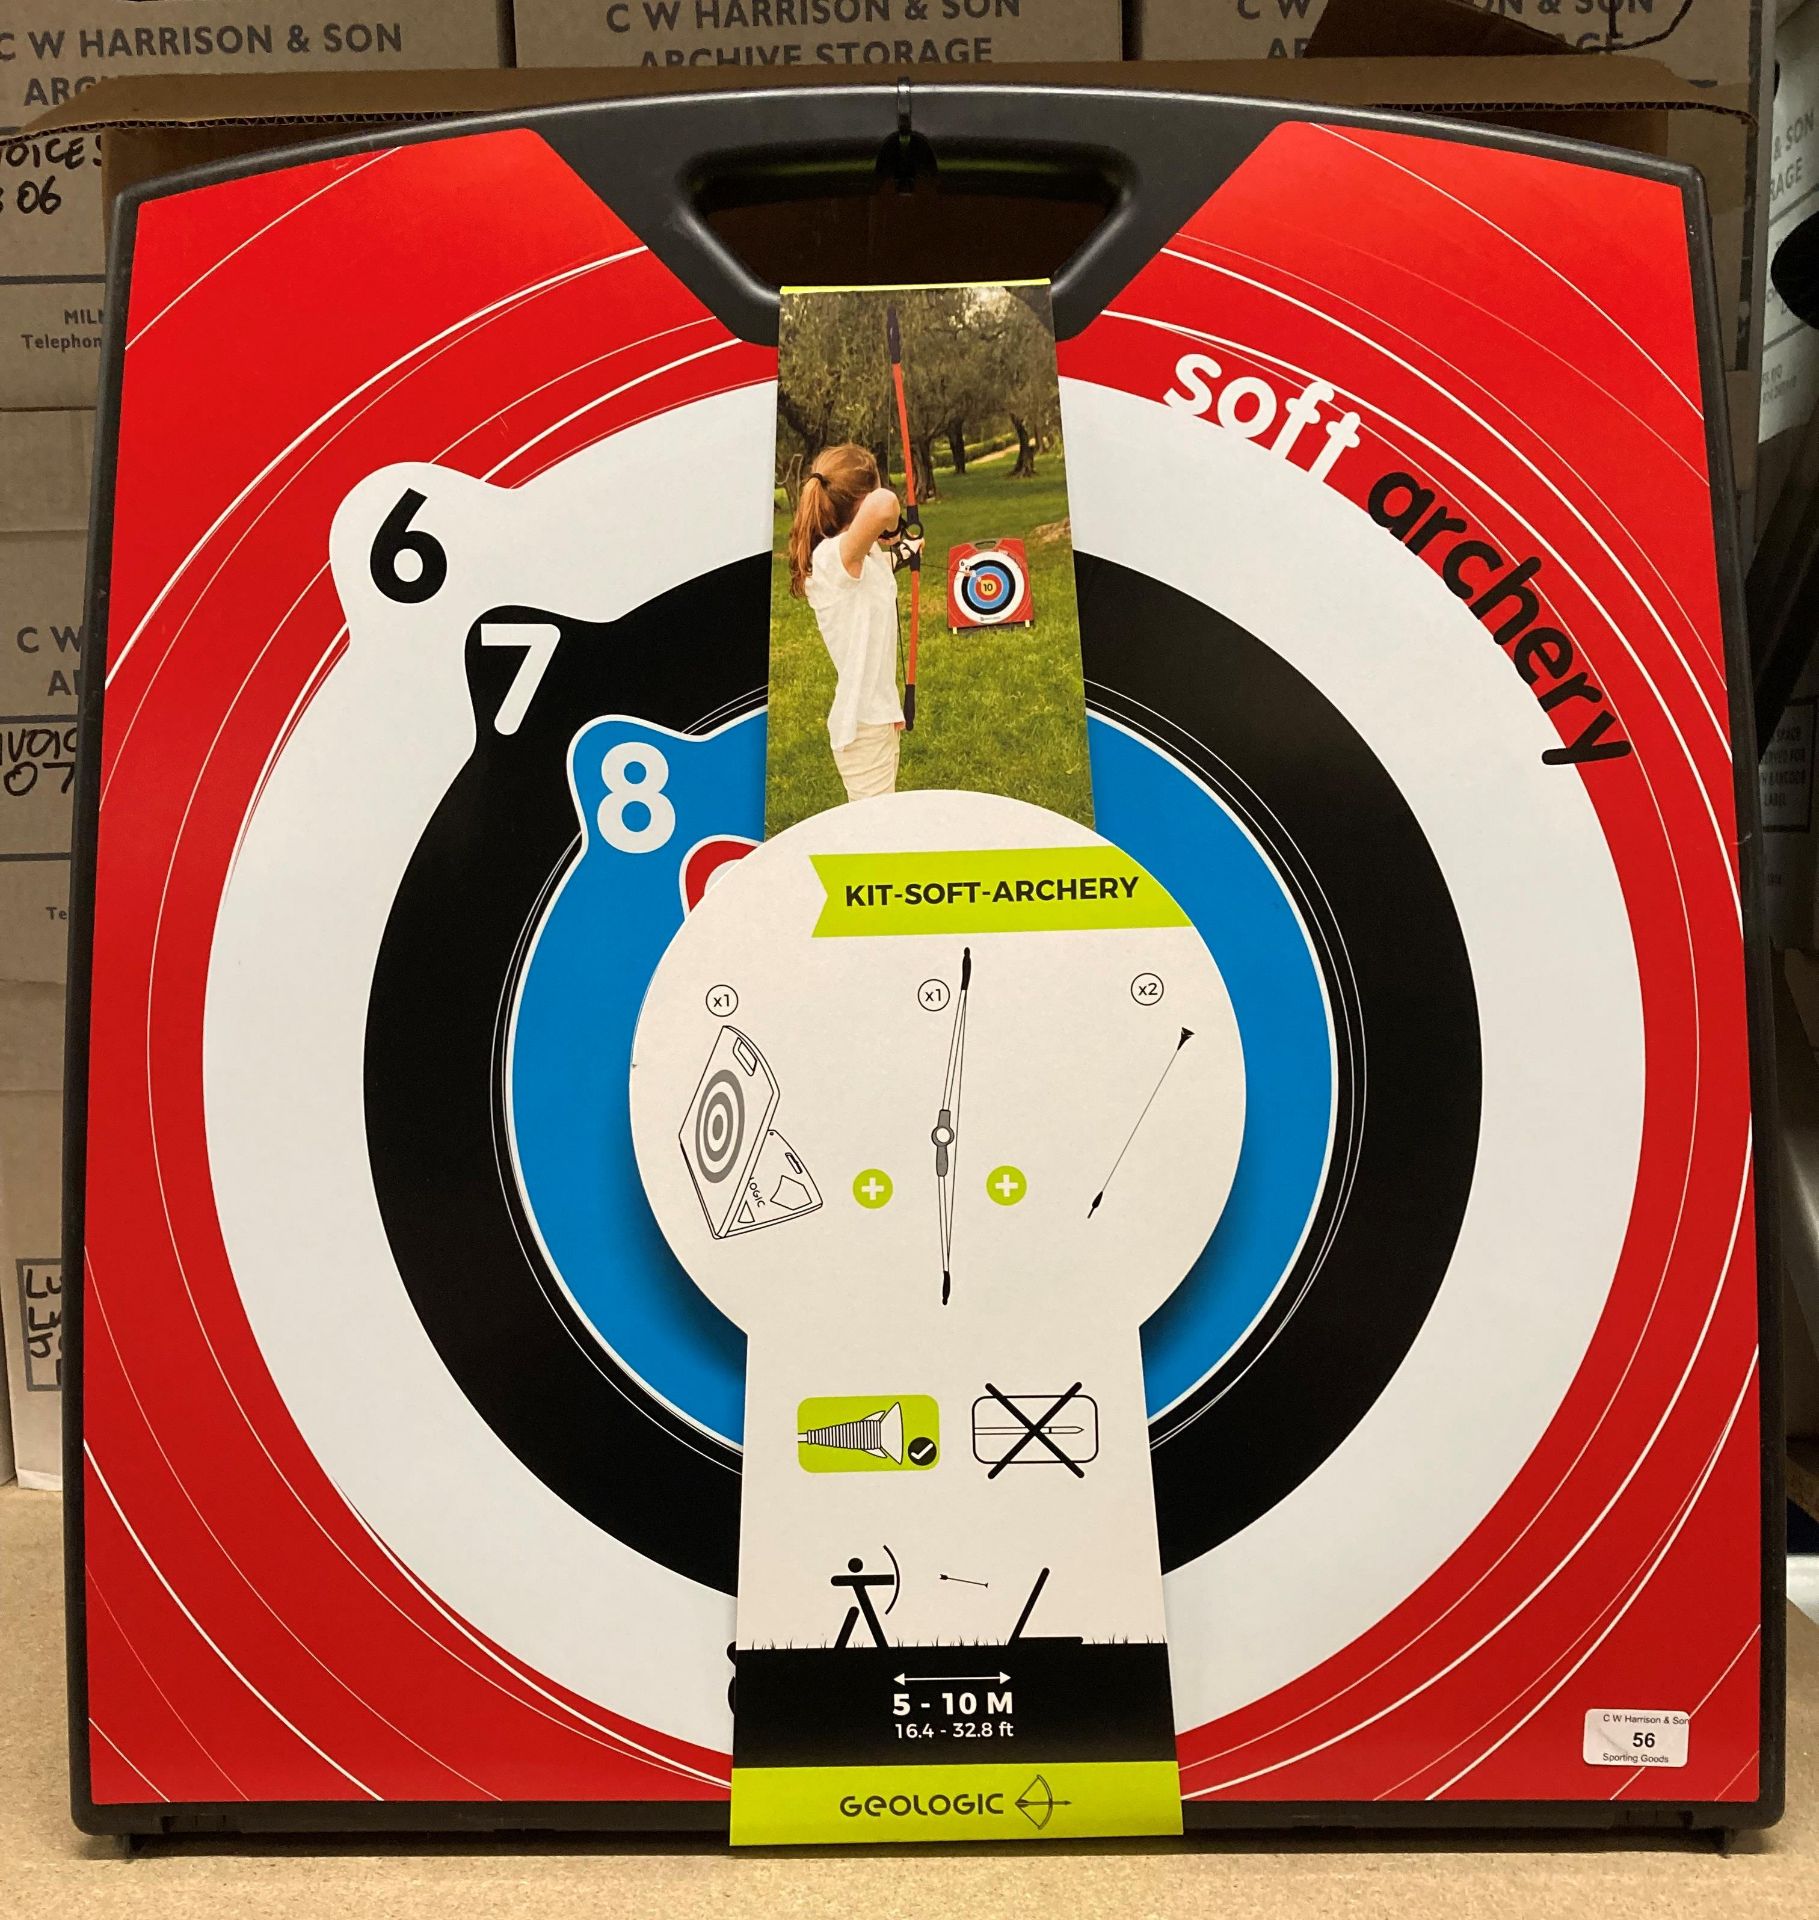 A Geologic soft archery kit Further Information *** Please note: This lot is subject